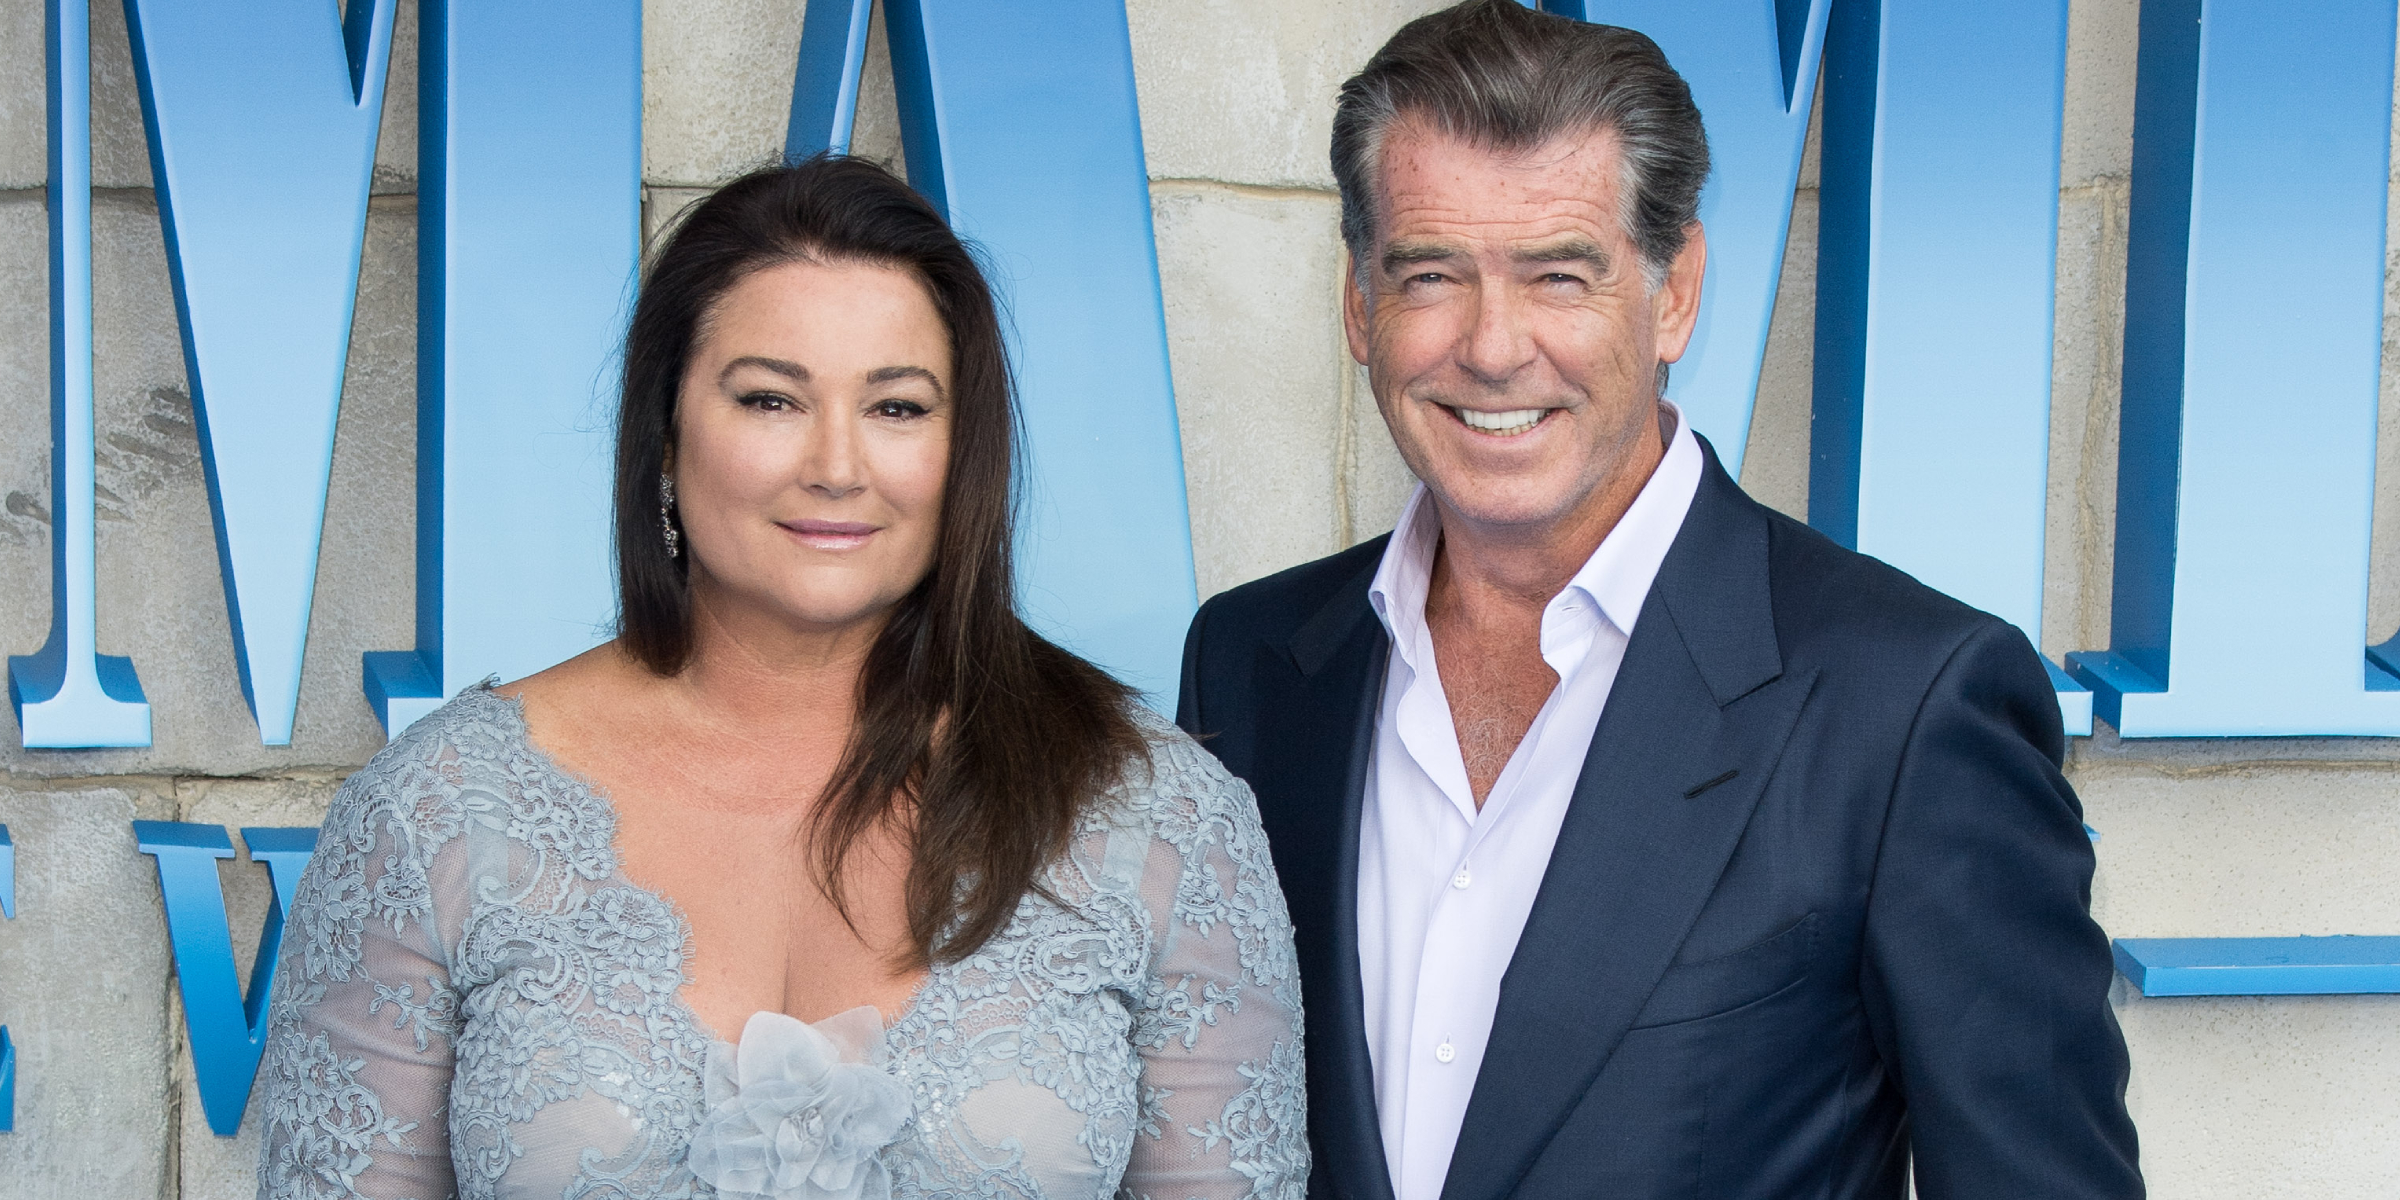 Keely and Pierce Brosnan | Source: Getty Images